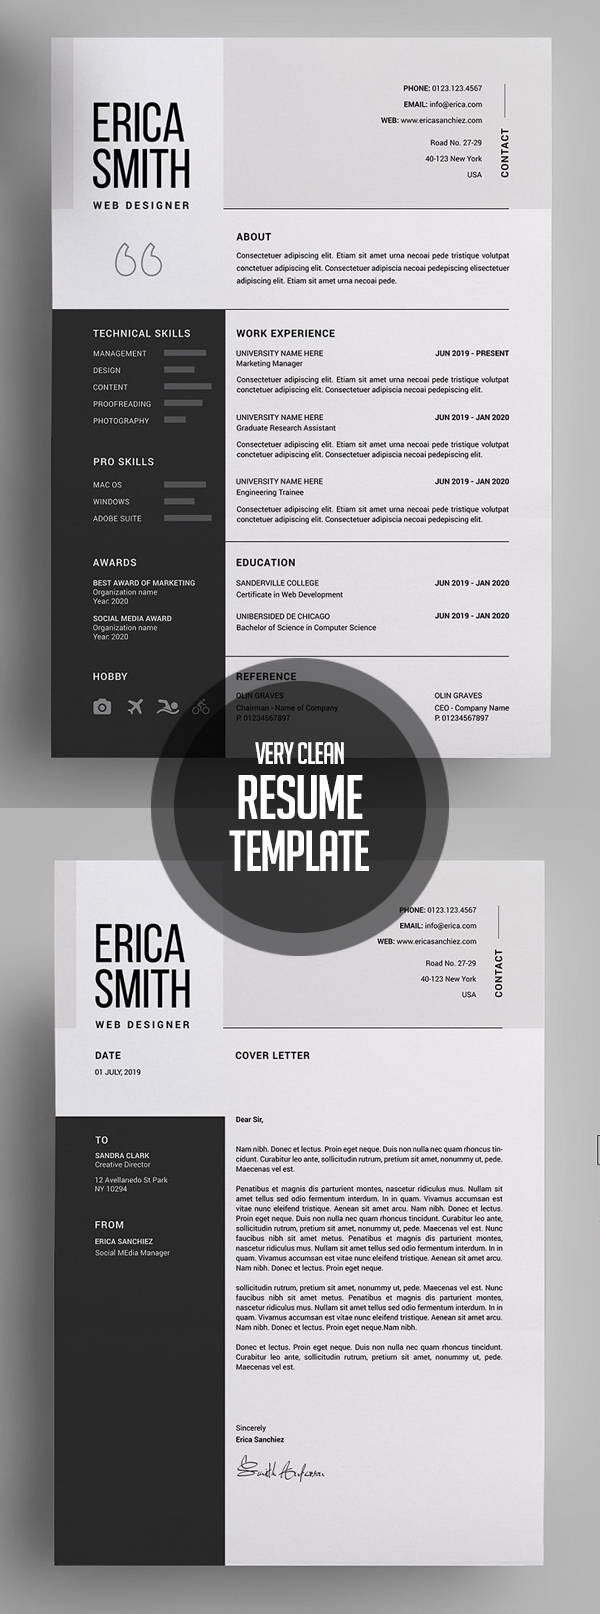 Clean Resume and Letterhead design